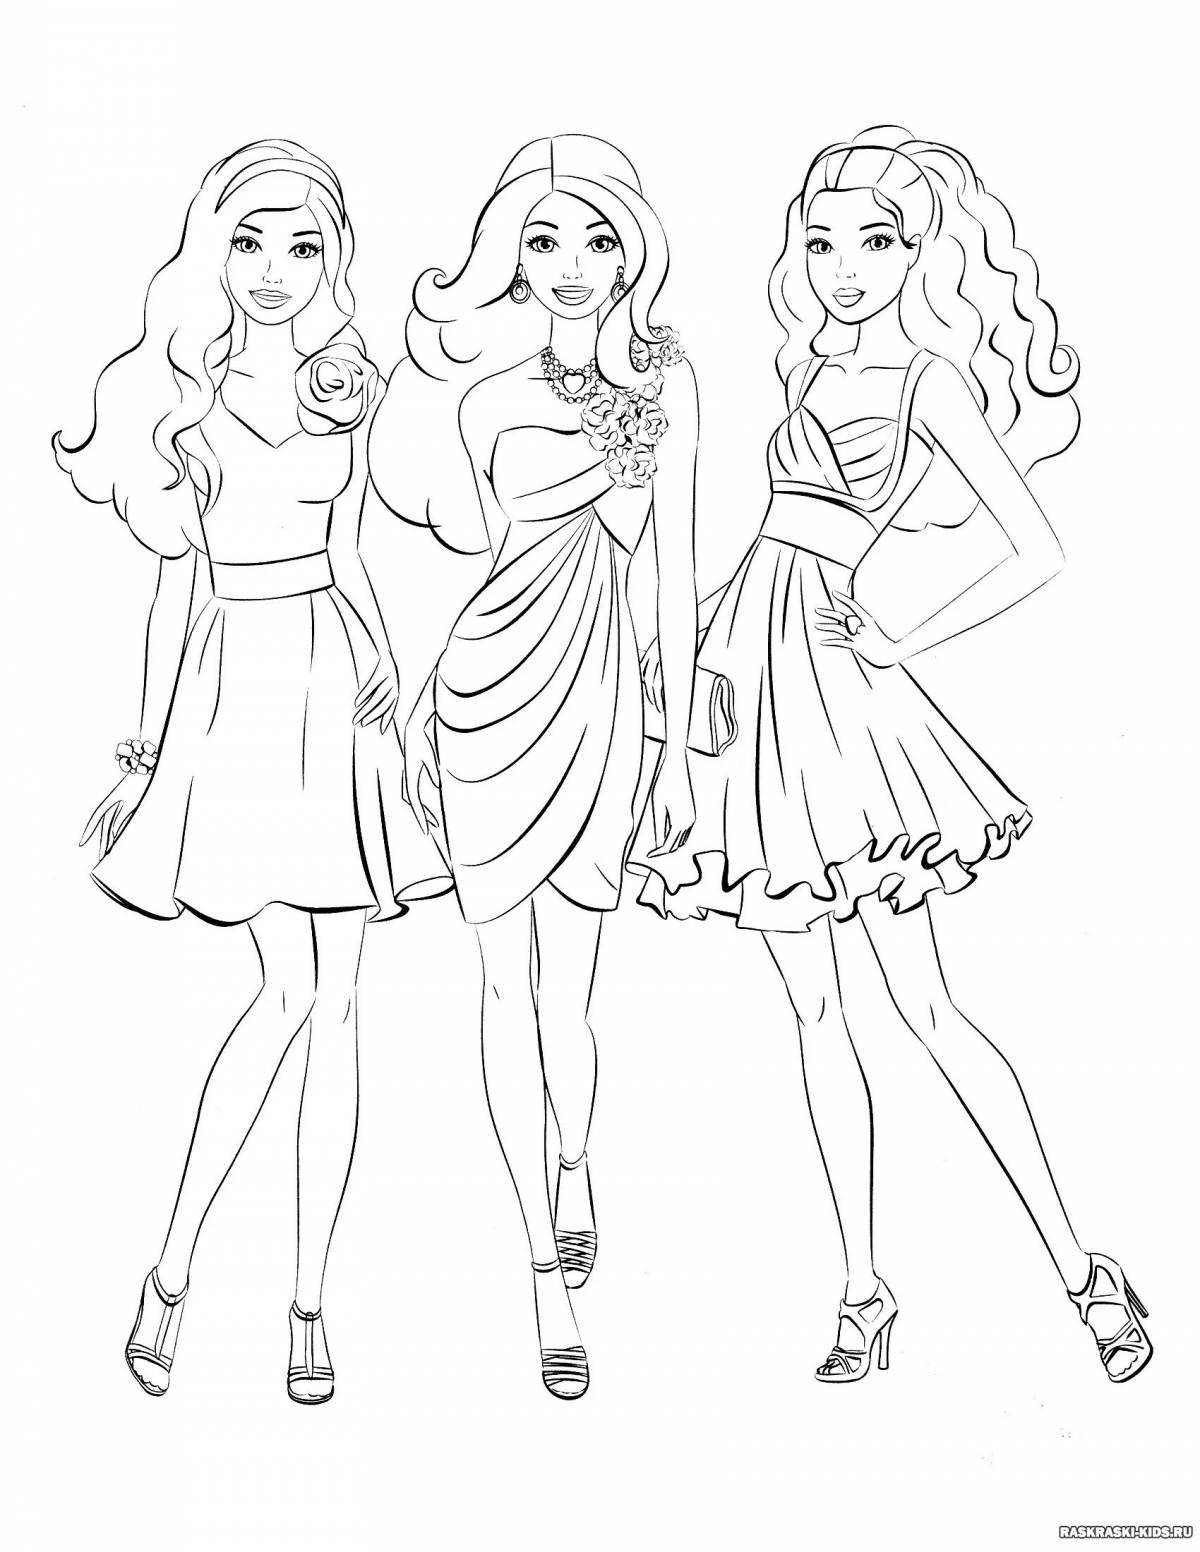 Charming barbie coloring page